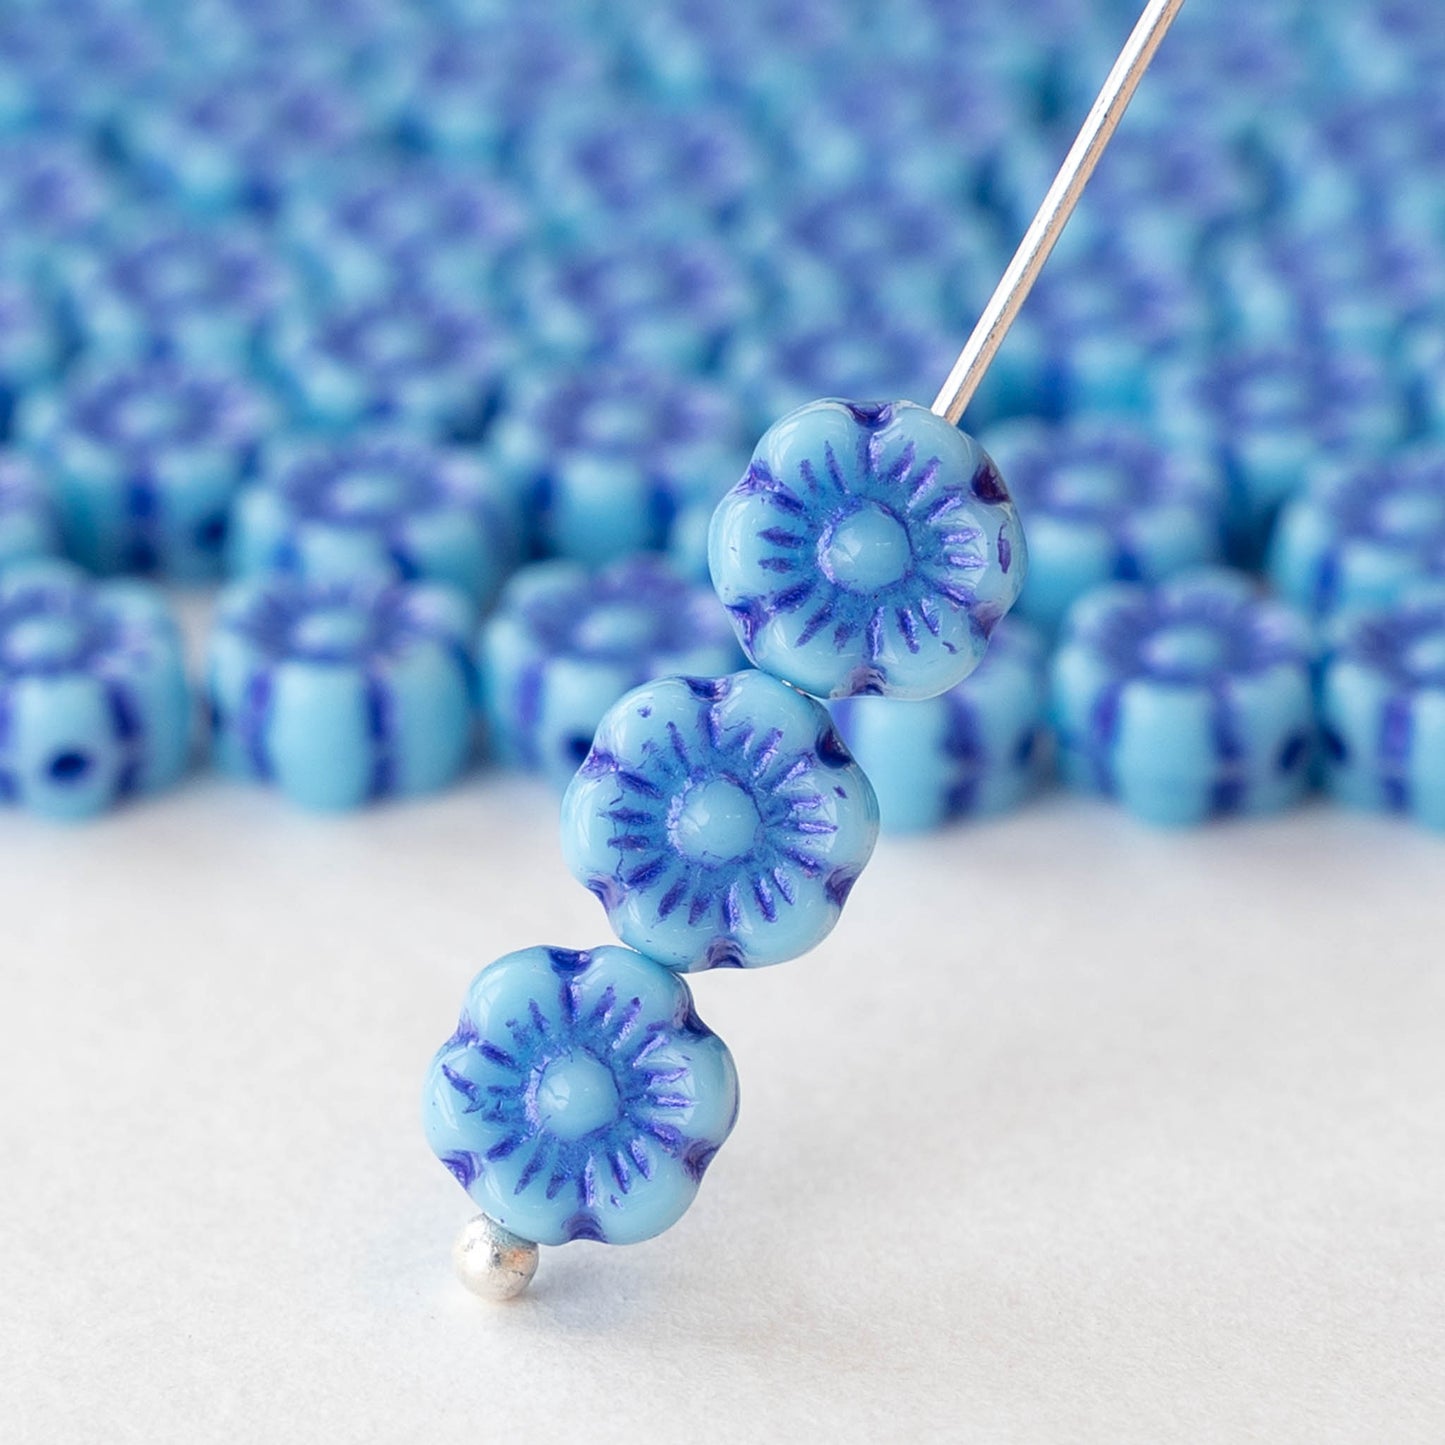 6mm Glass Flower Beads - Blue with Periwinkle Wash - 30 beads